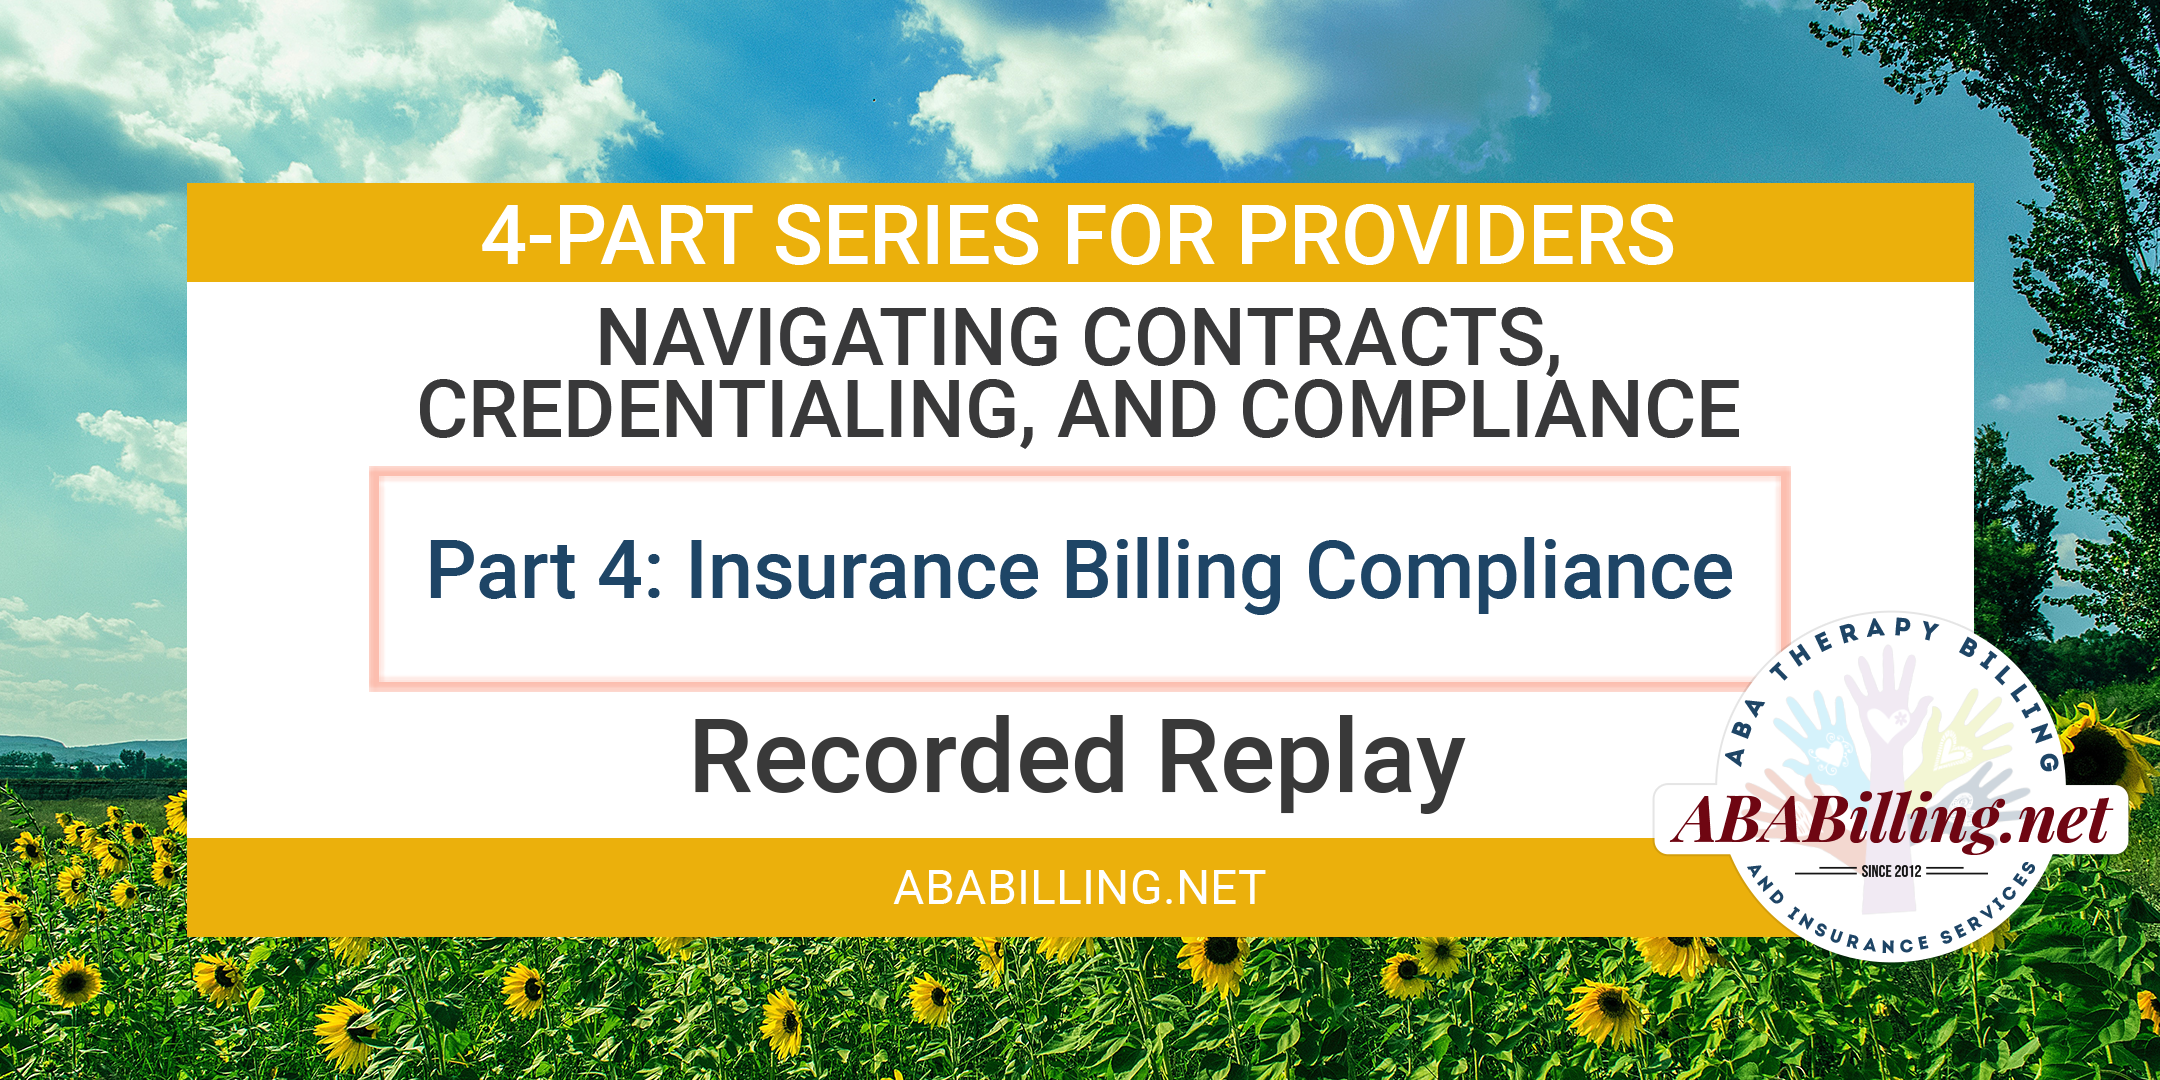 Webinar: Navigating Contracts, Credentialing, and Compliance Part 4: Insurance Billing Compliance